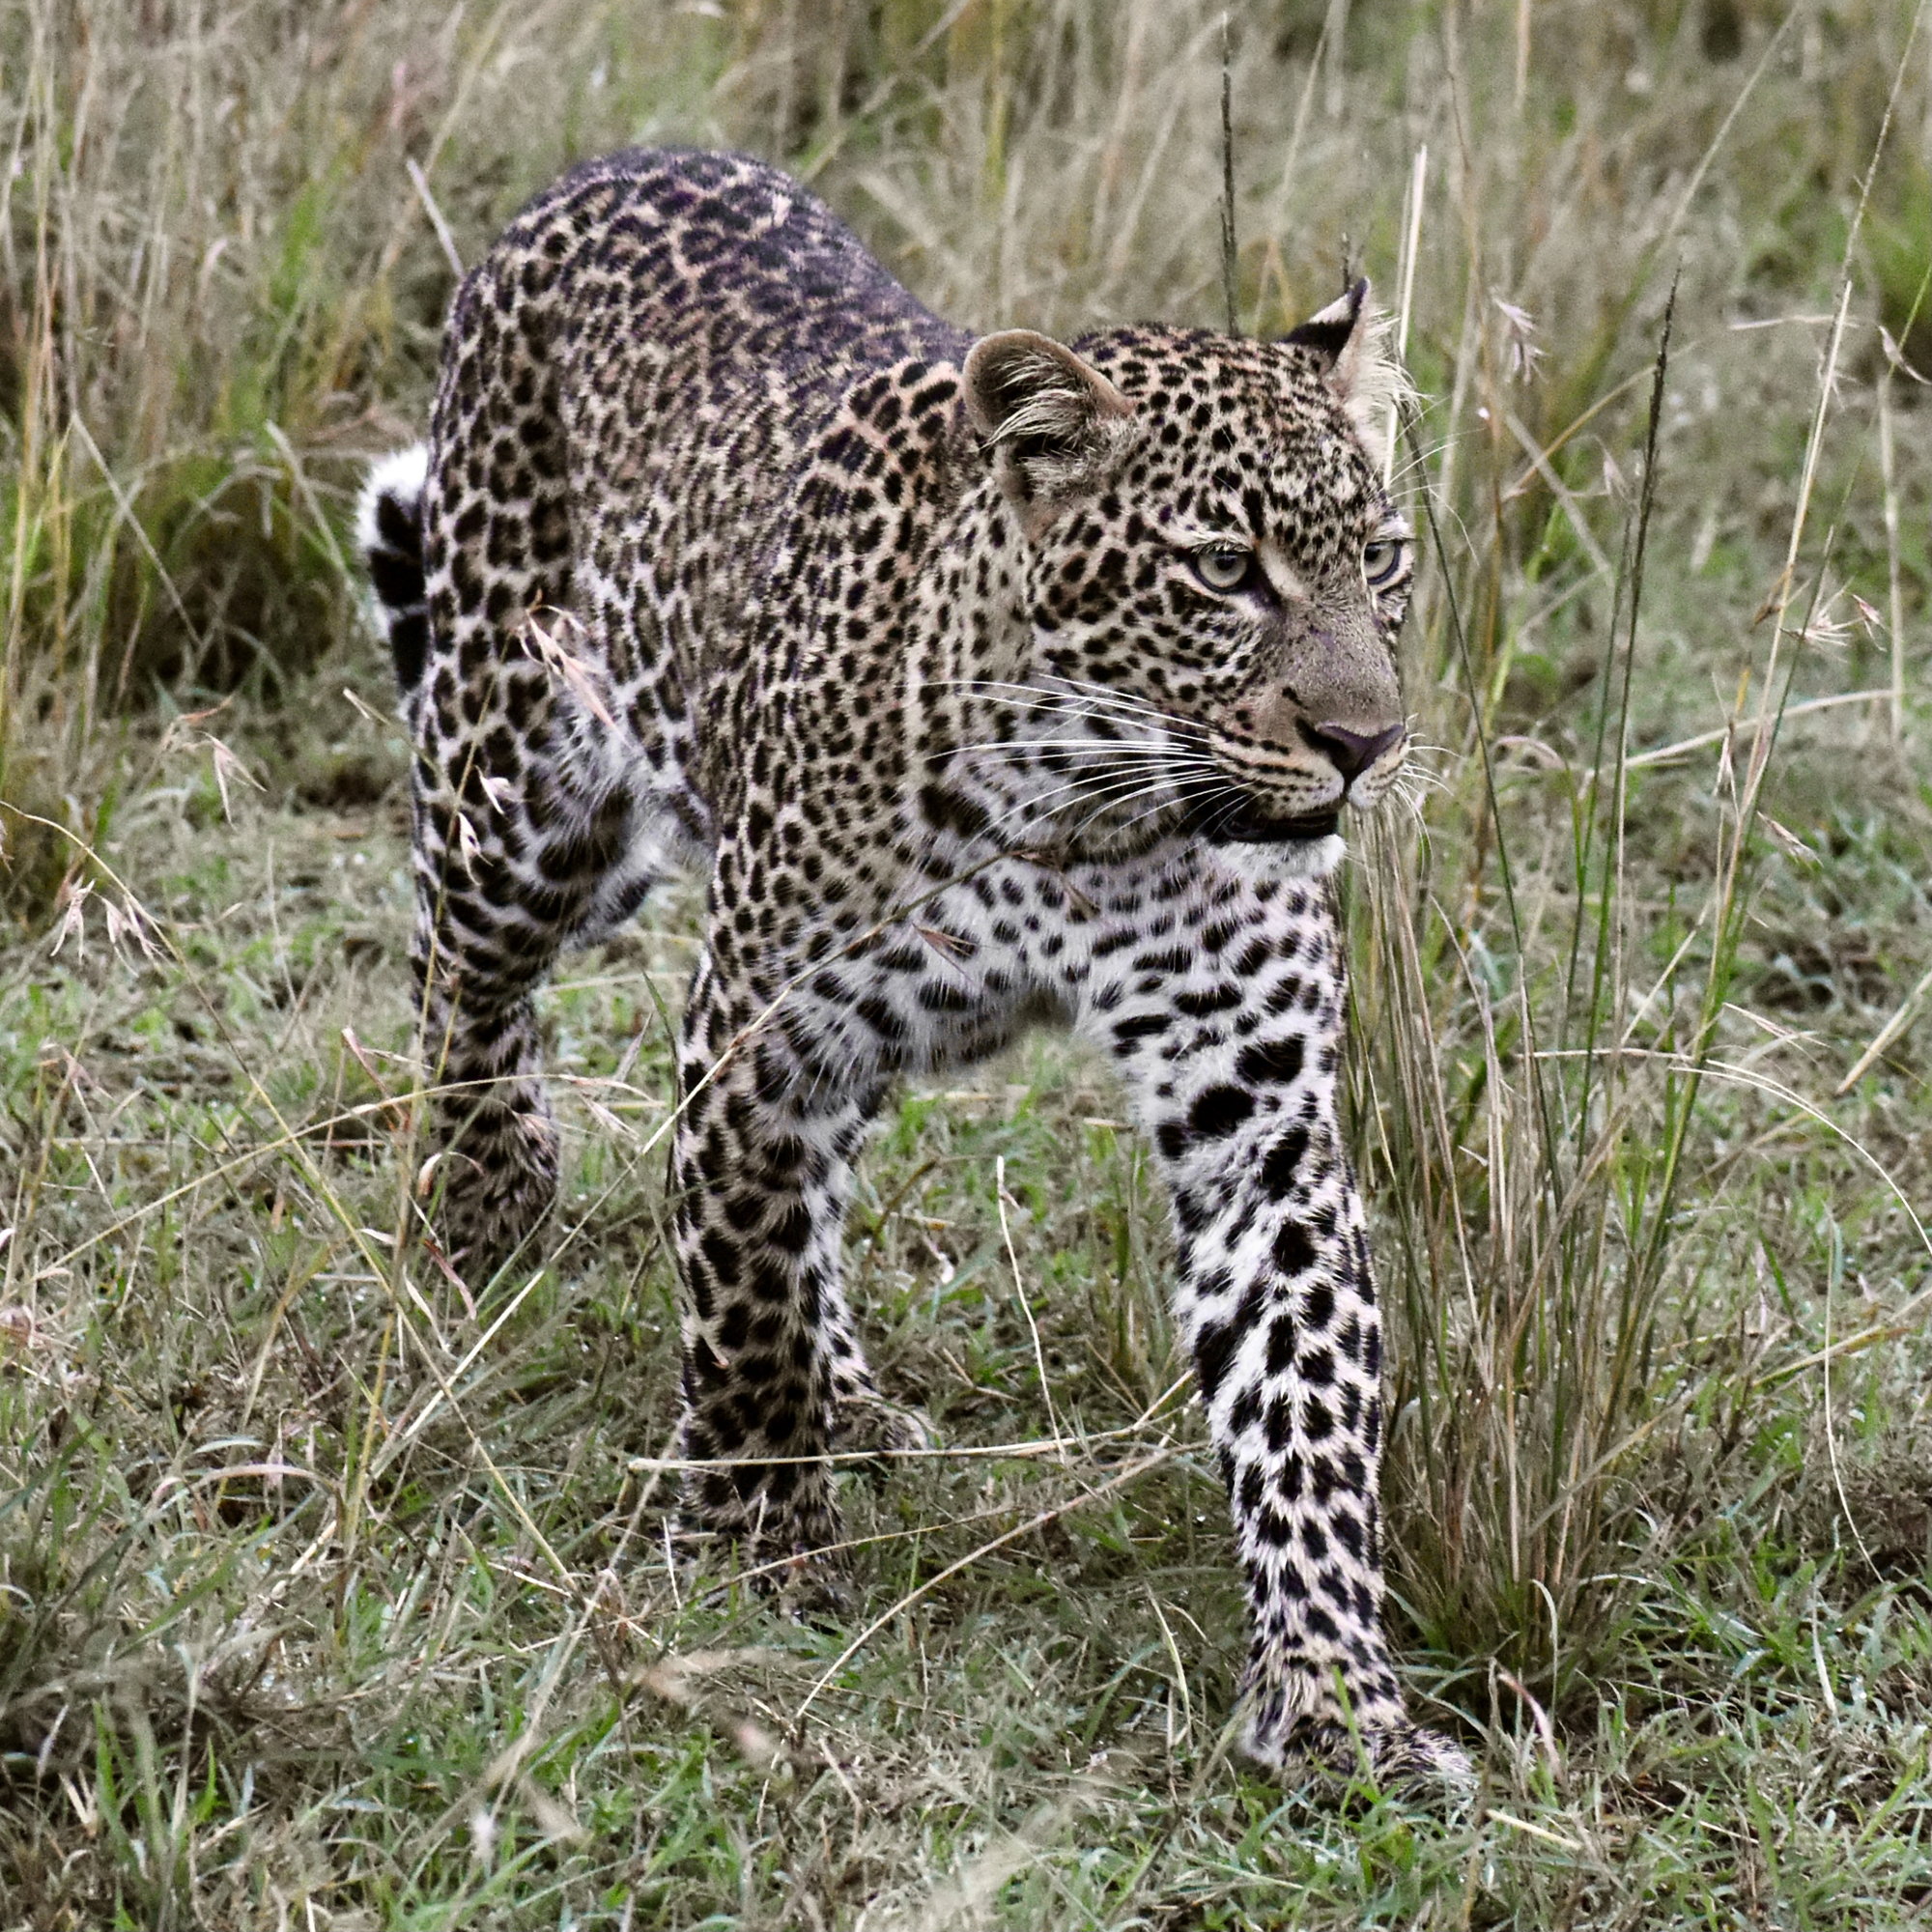 Trip Report Our September Kenya Safari Exceeded Our Wildest Hopes - Page 2  - Fodor's Travel Talk Forums